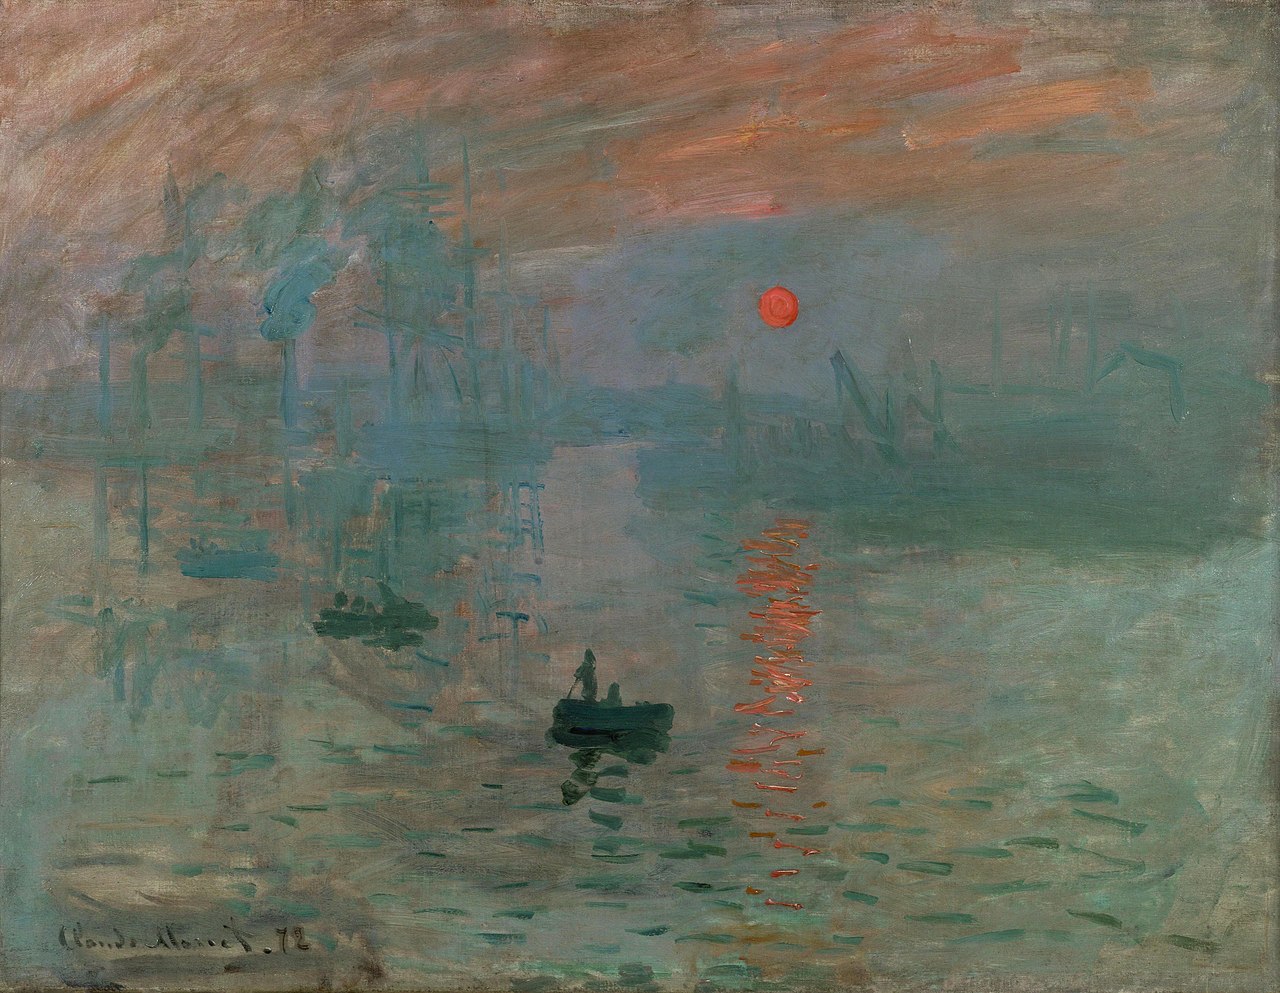 Picture of Claude Monet's painting titled "Impression, Sunrise."